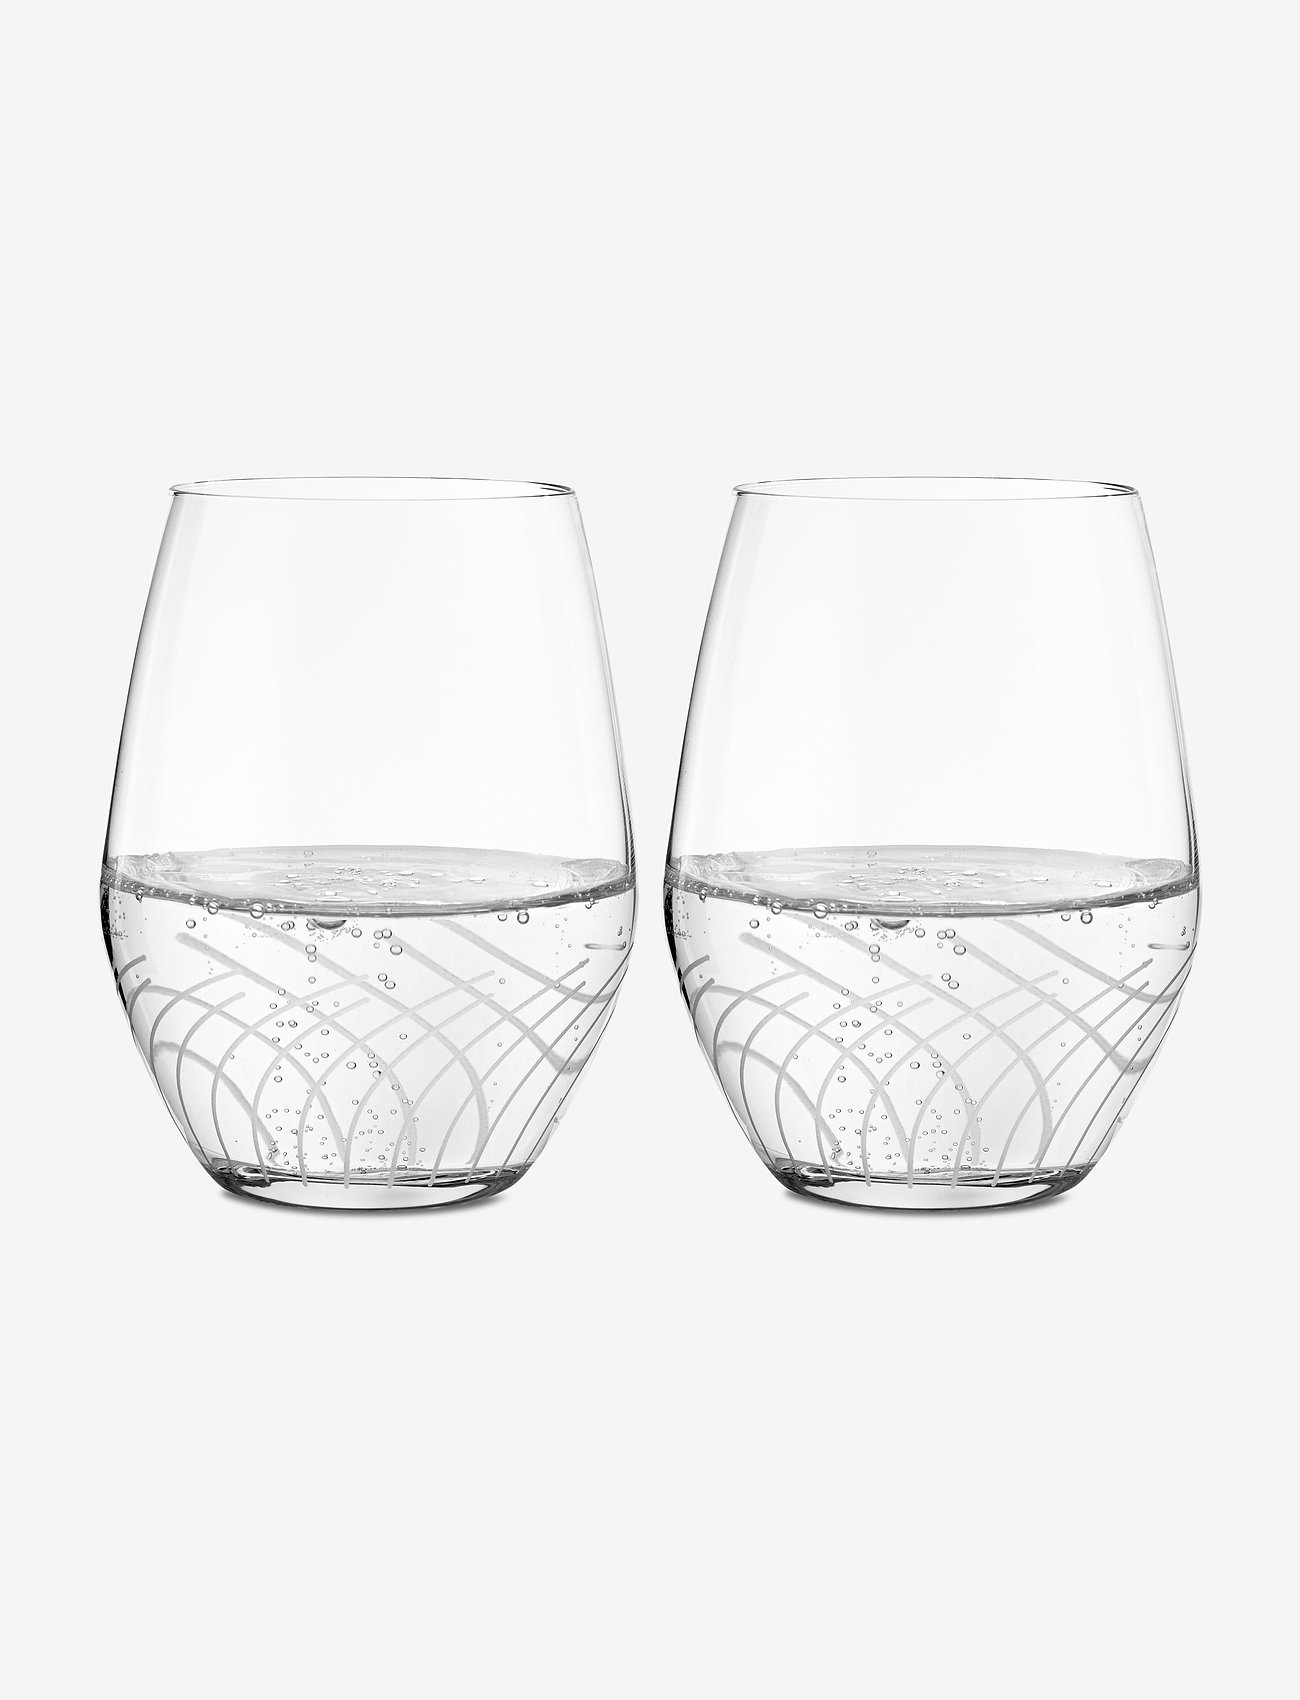 Holmegaard - Cabernet Lines Tumbler 25 cl 2 pcs. - drinking glasses & tumblers - clear - 1